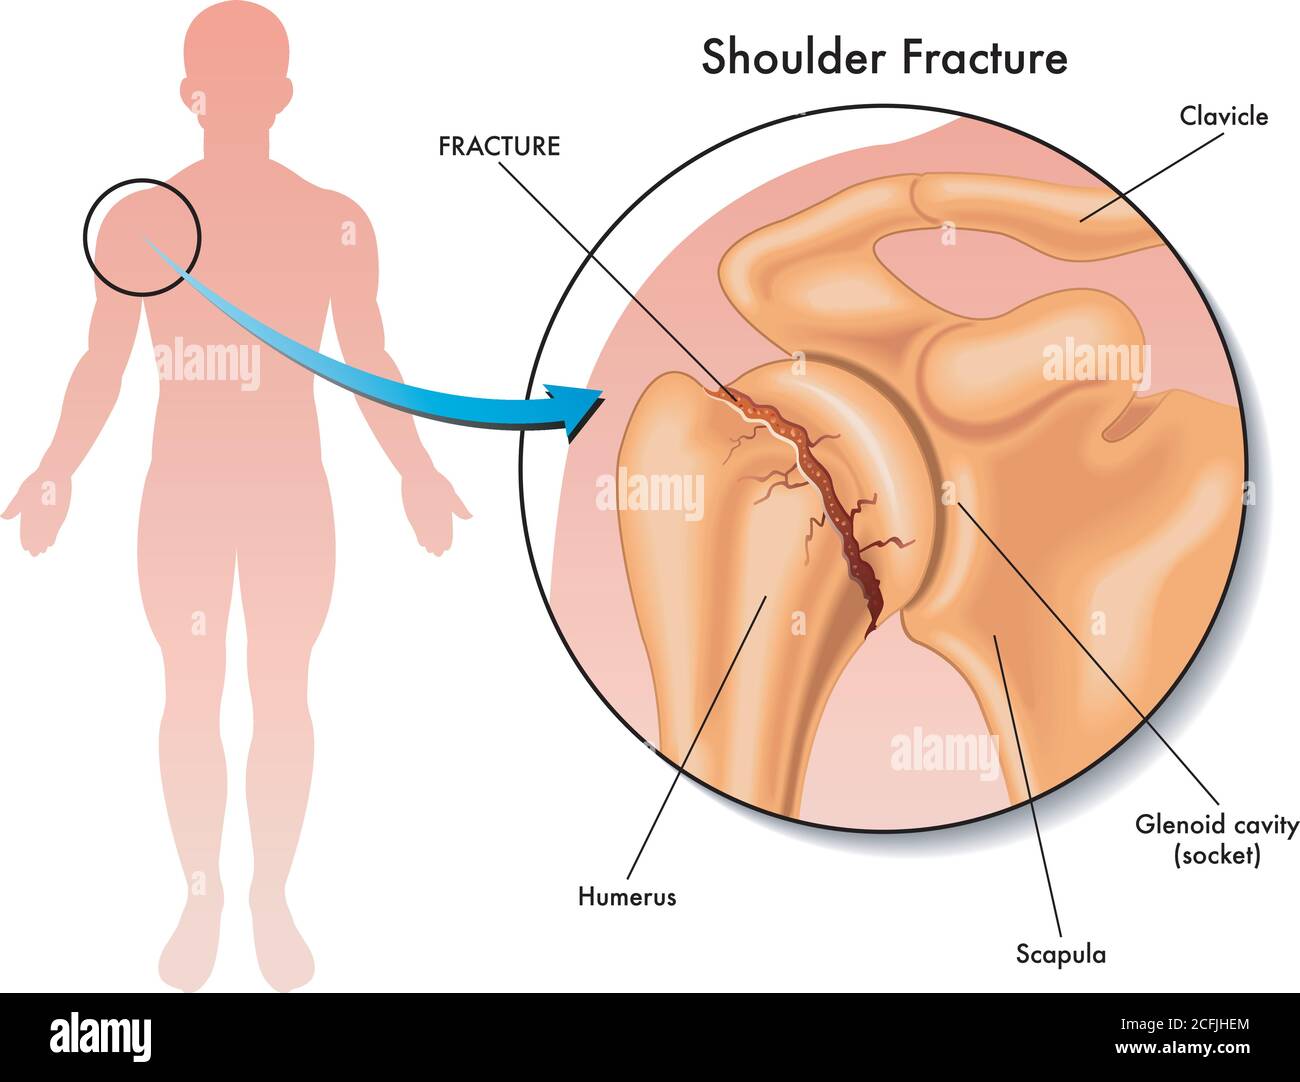 Medical illustration of a shoulder fracture and its location in the human body, with annotations. Stock Vector